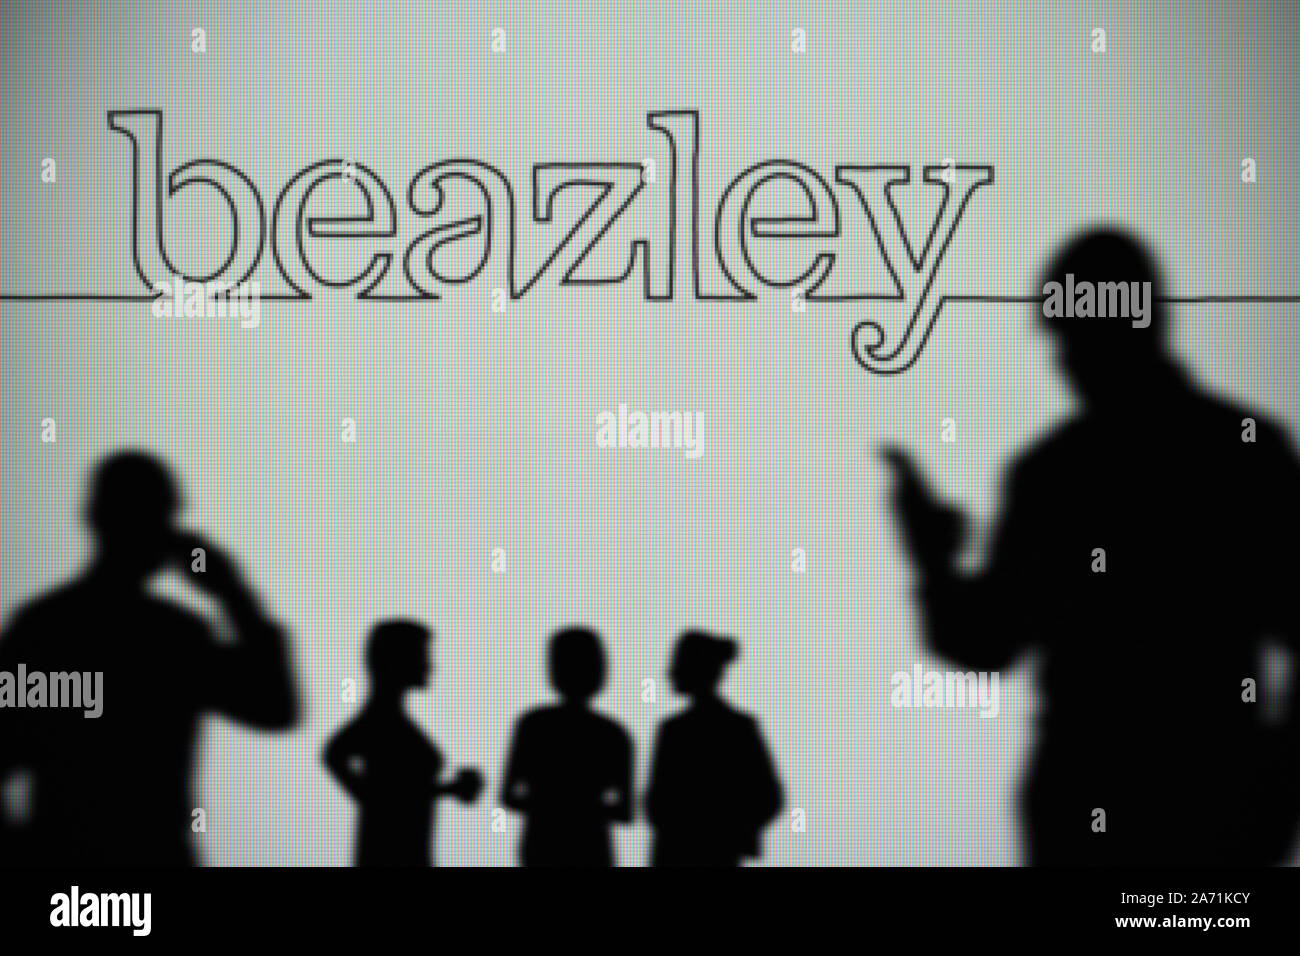 The Beazley Group logo is seen on an LED screen in the background while a silhouetted person uses a smartphone (Editorial use only) Stock Photo